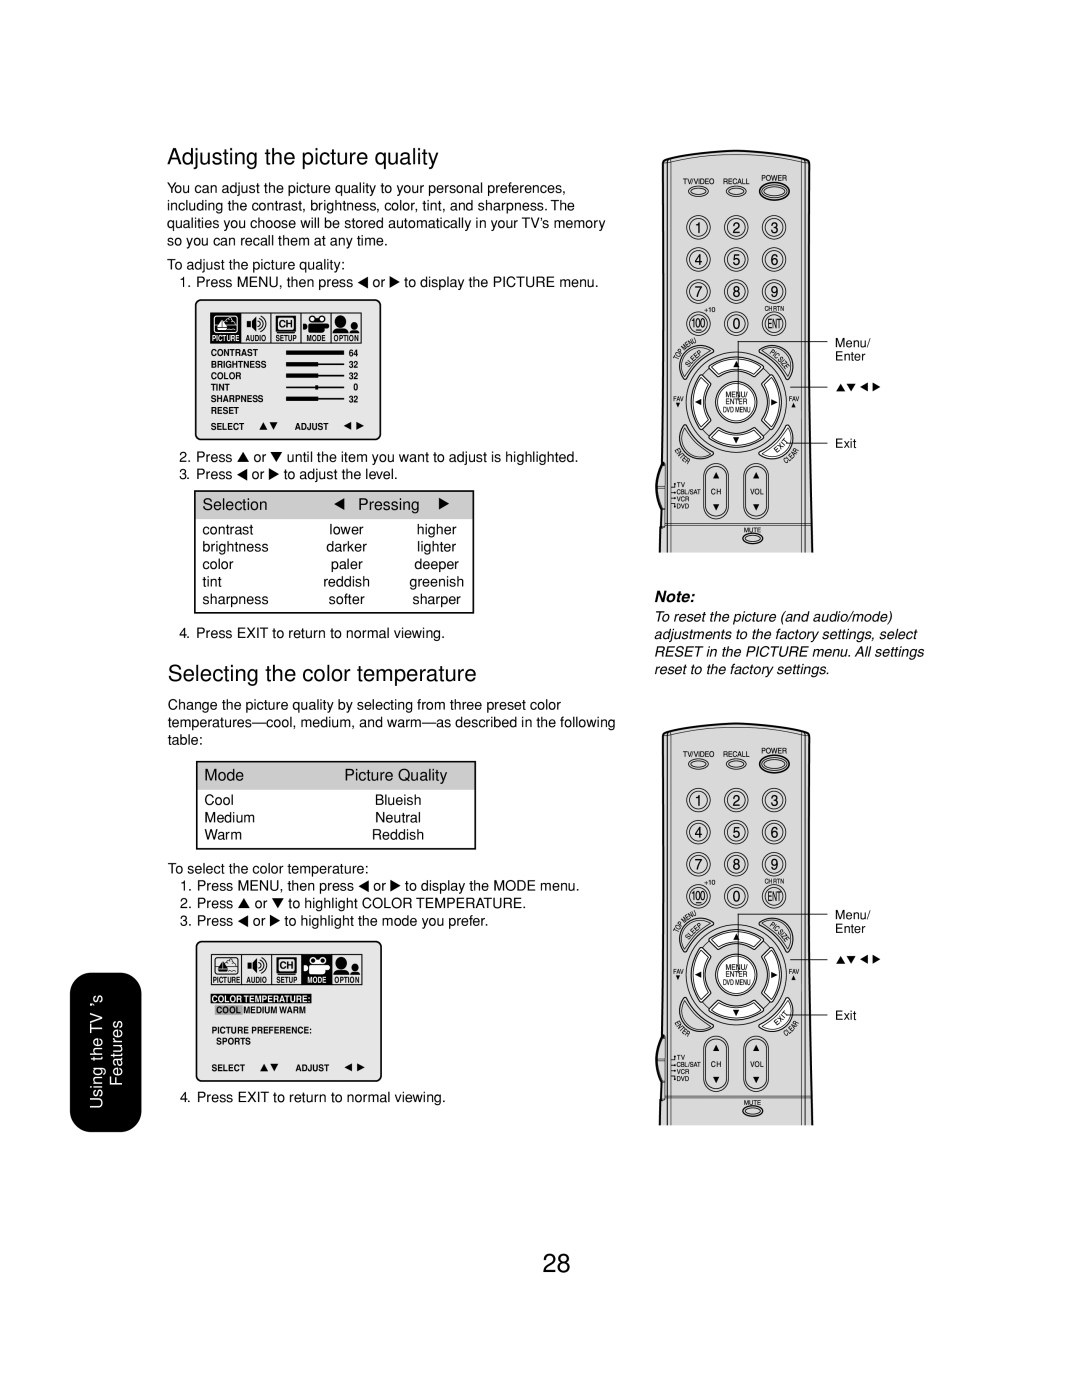 Toshiba 27AF53 appendix To adjust the picture quality, To select the color temperature 